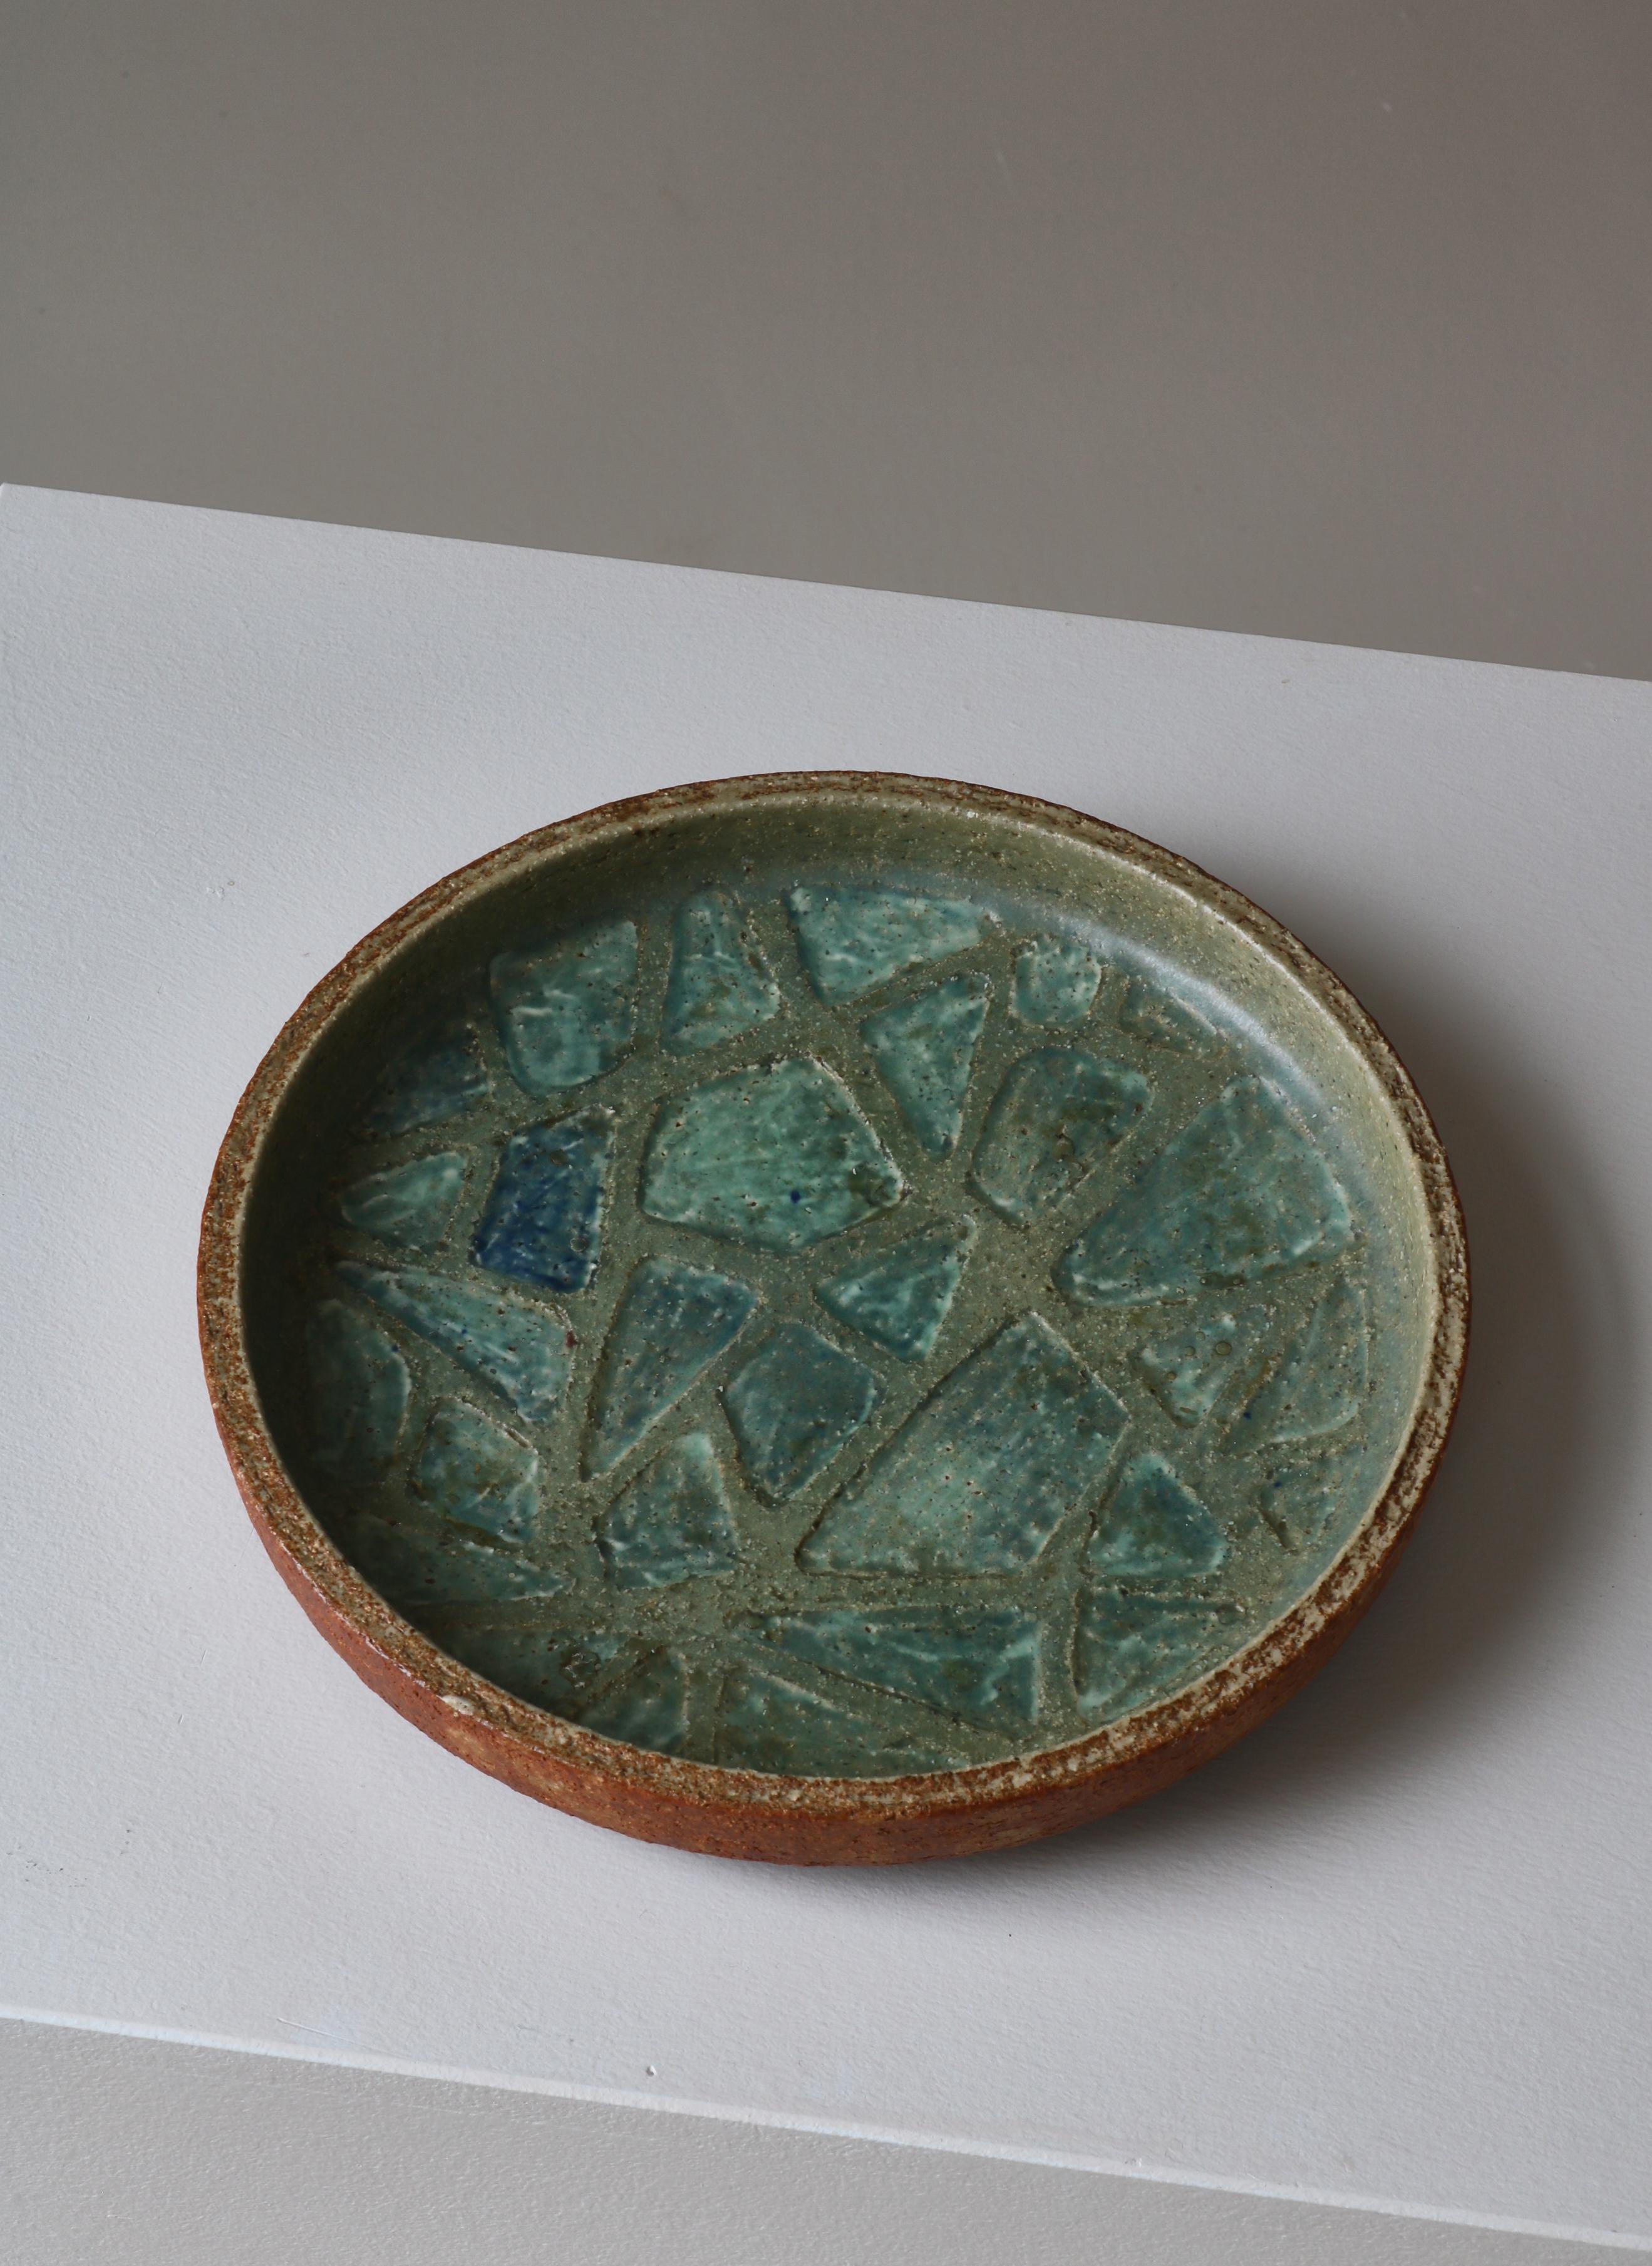 Unique stoneware bowl with branch-like decor and greenish glazing by Saxbo Pottery, Denmark. Made by Eva Staehr-Nielsen in the 1960s. Signed 